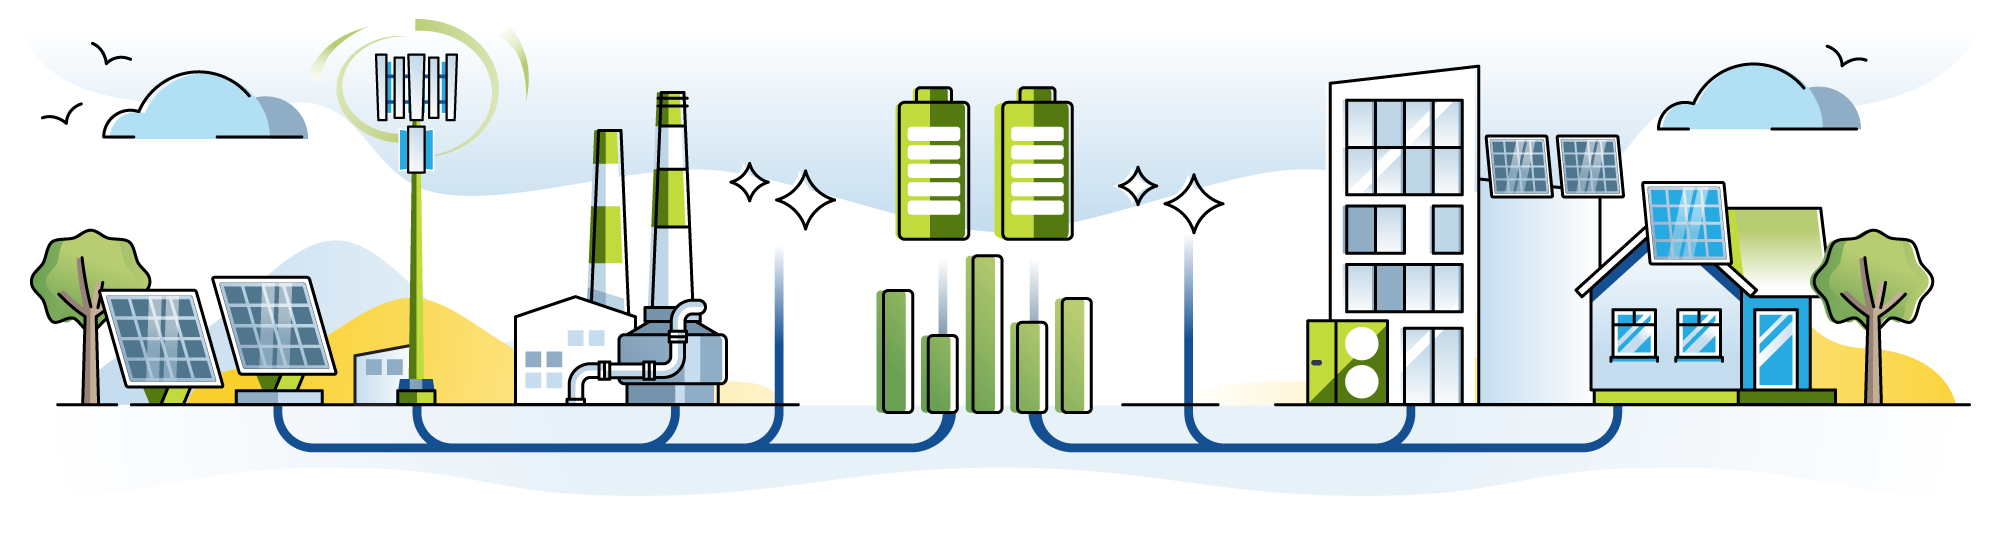 decorative graphic of green energy, batteries and telco environments